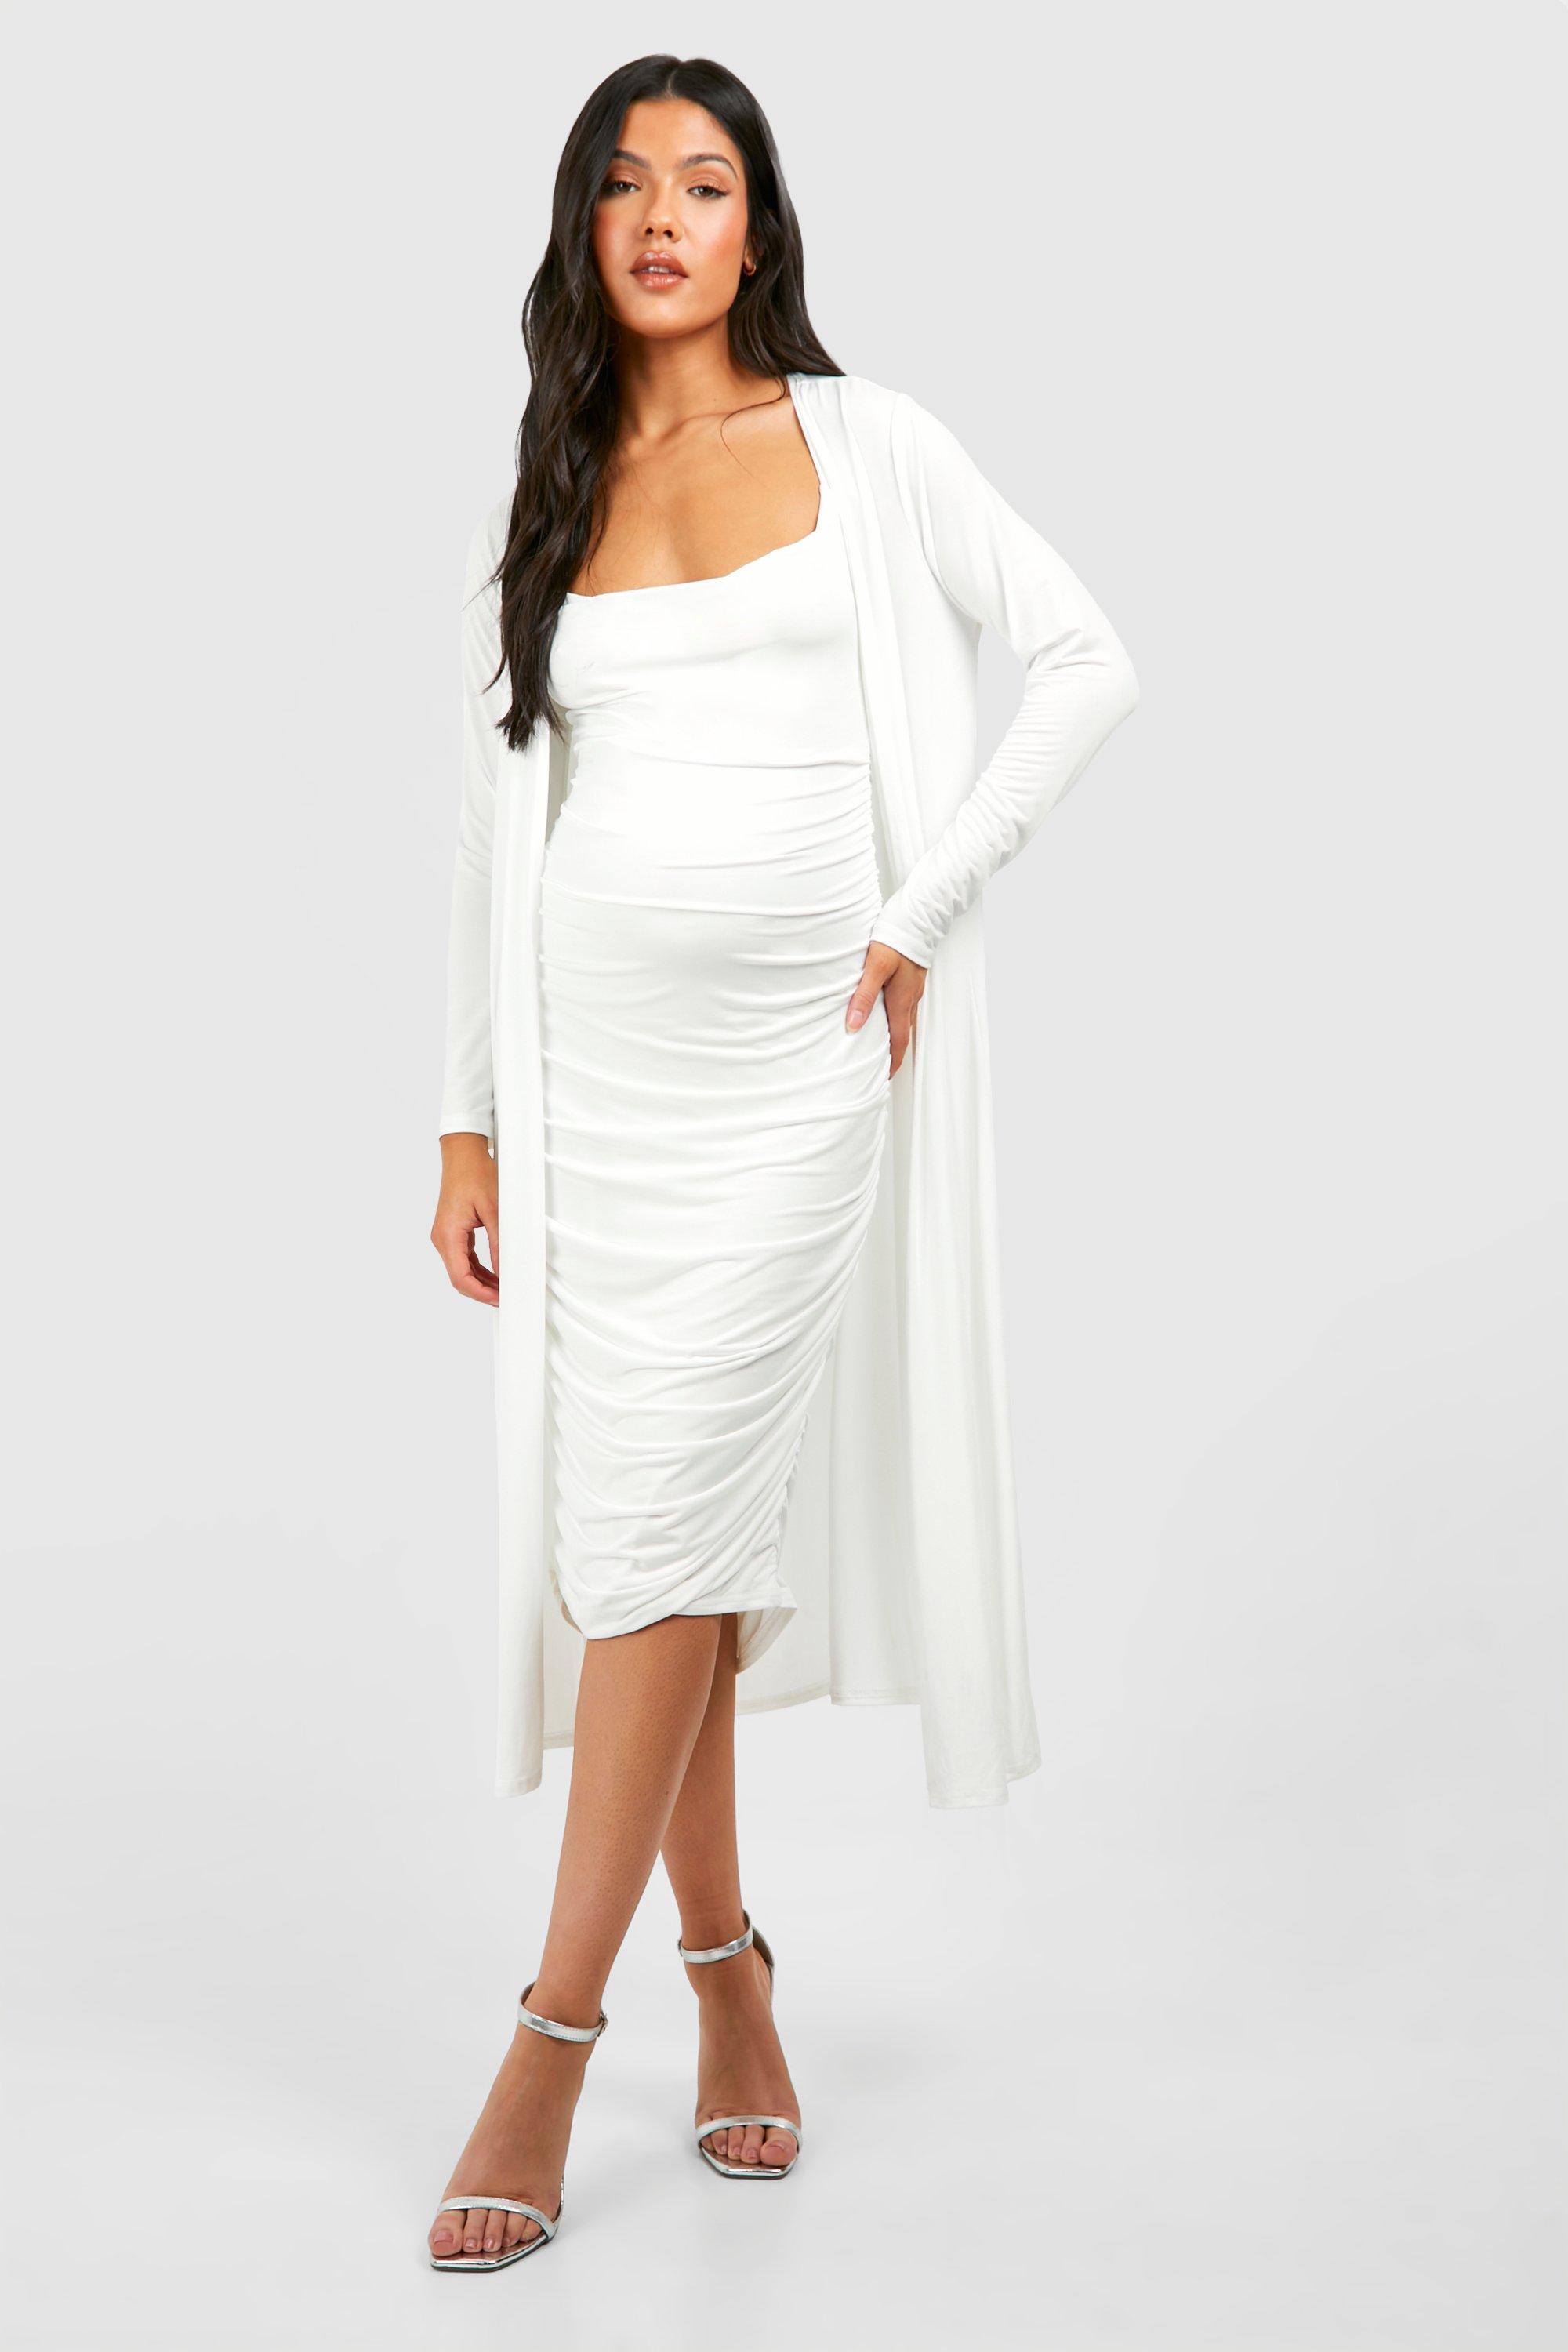 Boohoo Maternity Strappy Cowl Neck Dress And Duster Coat in White